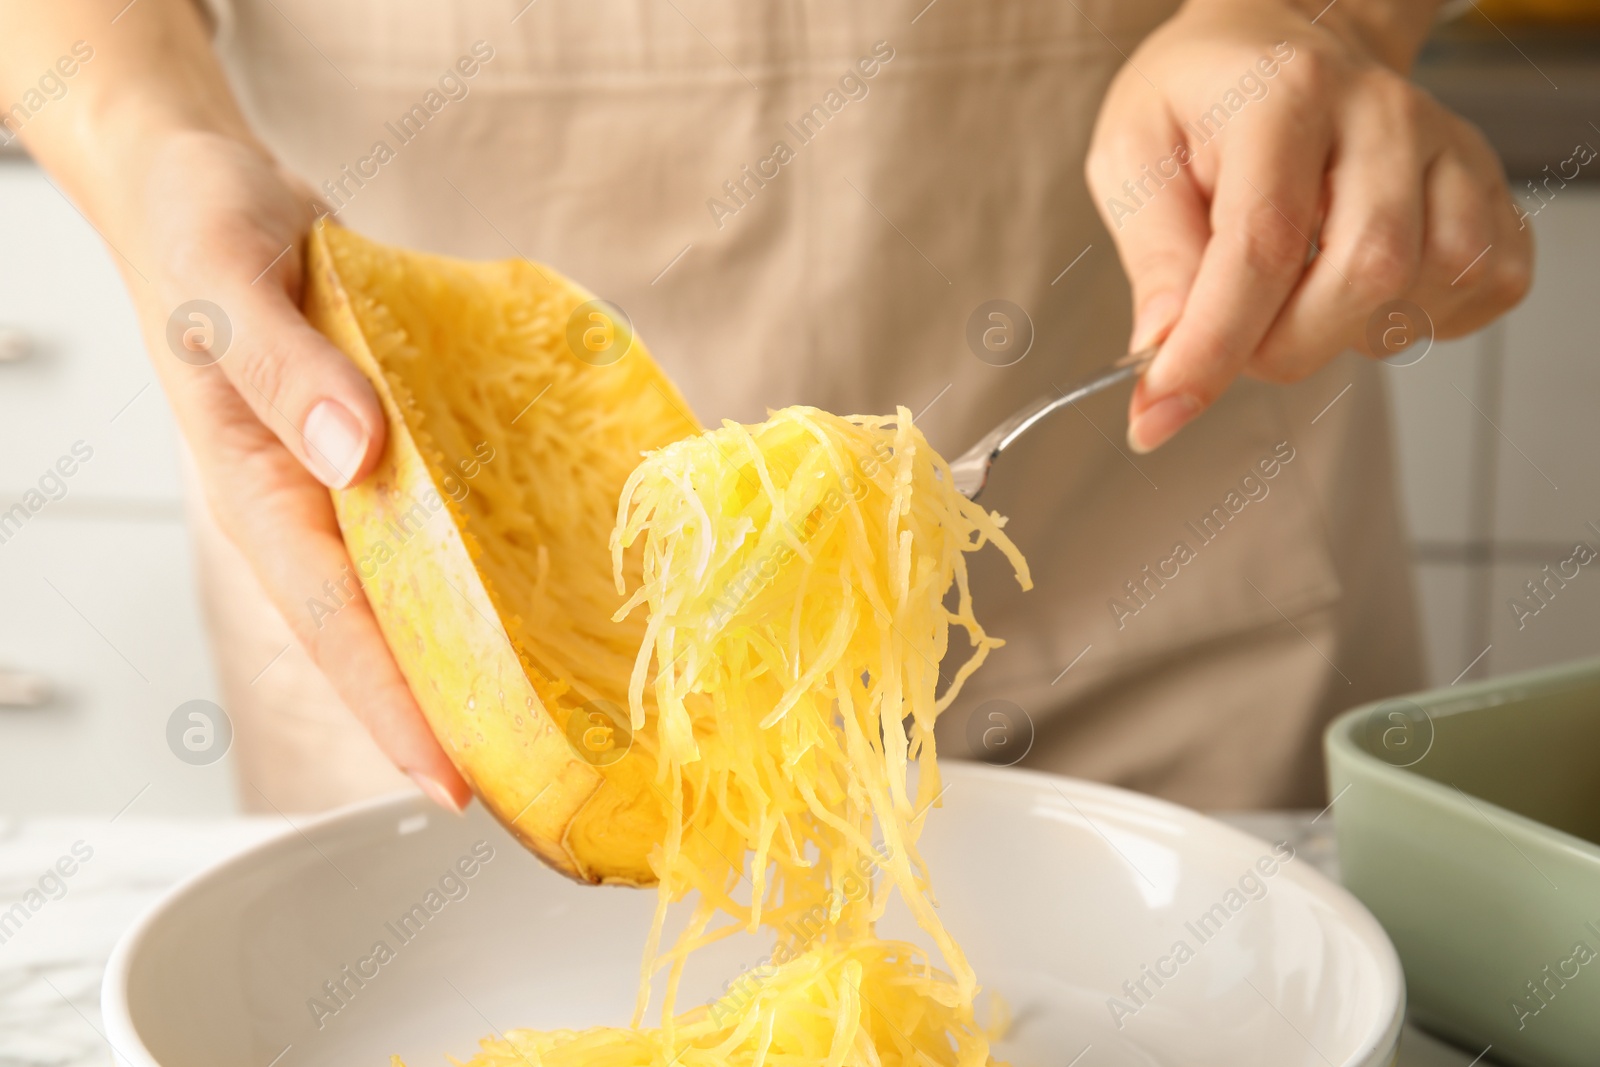 Photo of Woman scraping flesh of cooked spaghetti squash with fork in kitchen